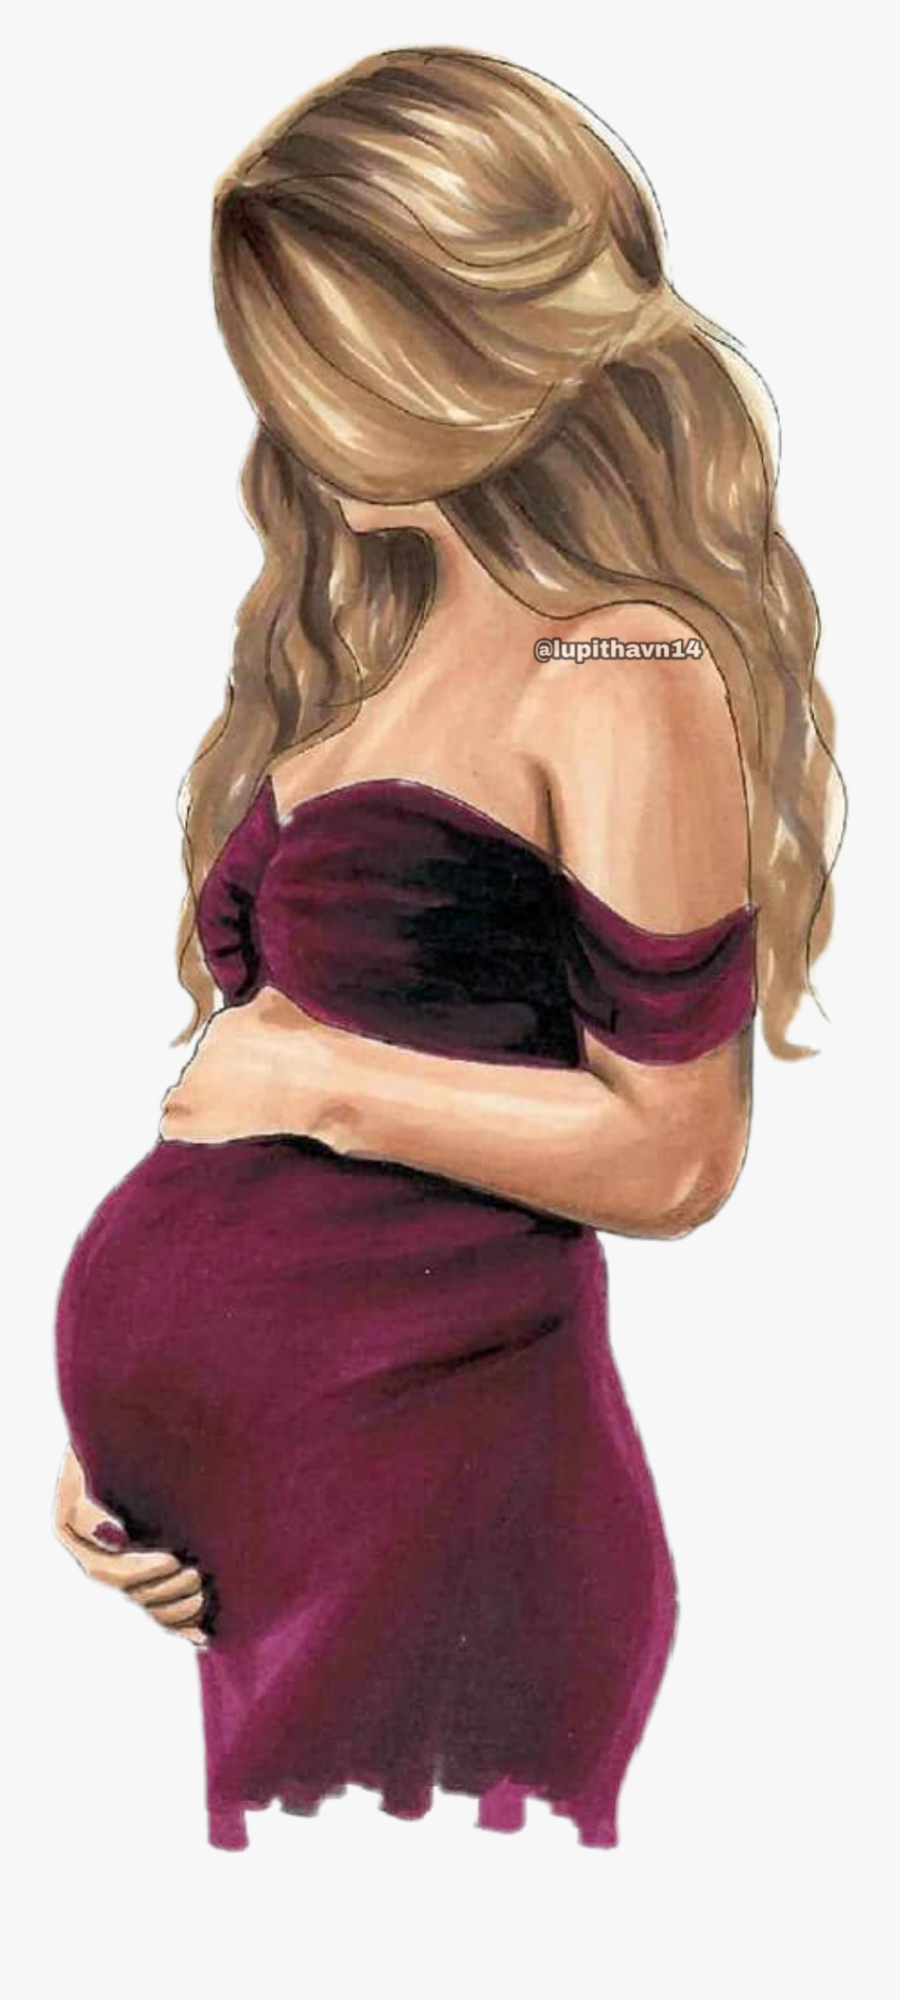 How To Draw Pregnant Woman Mocilq